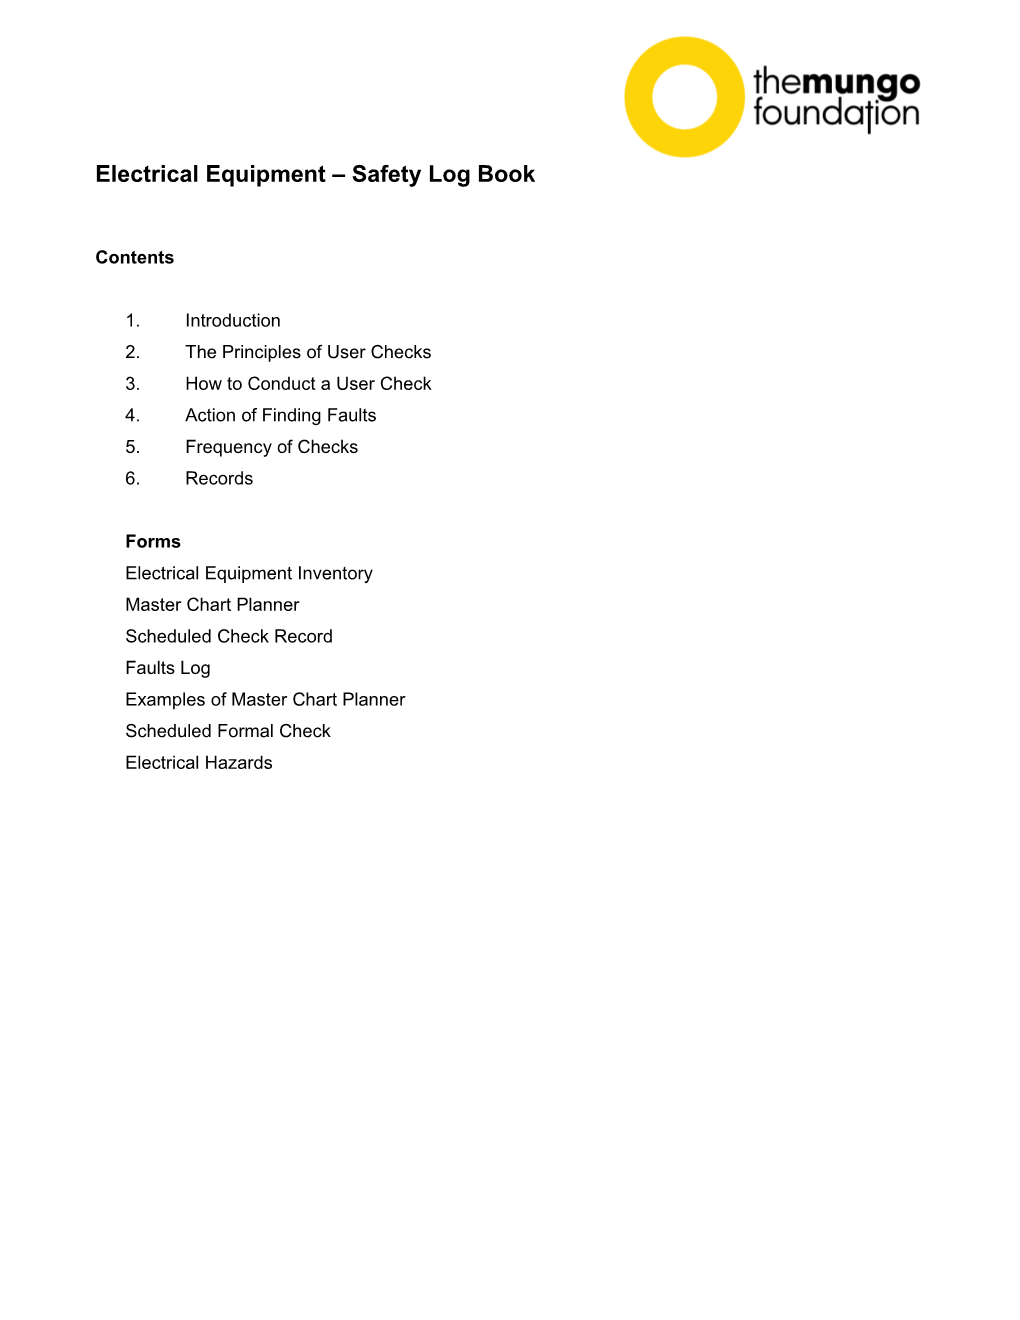 Electrical Equipment Safety Log Book